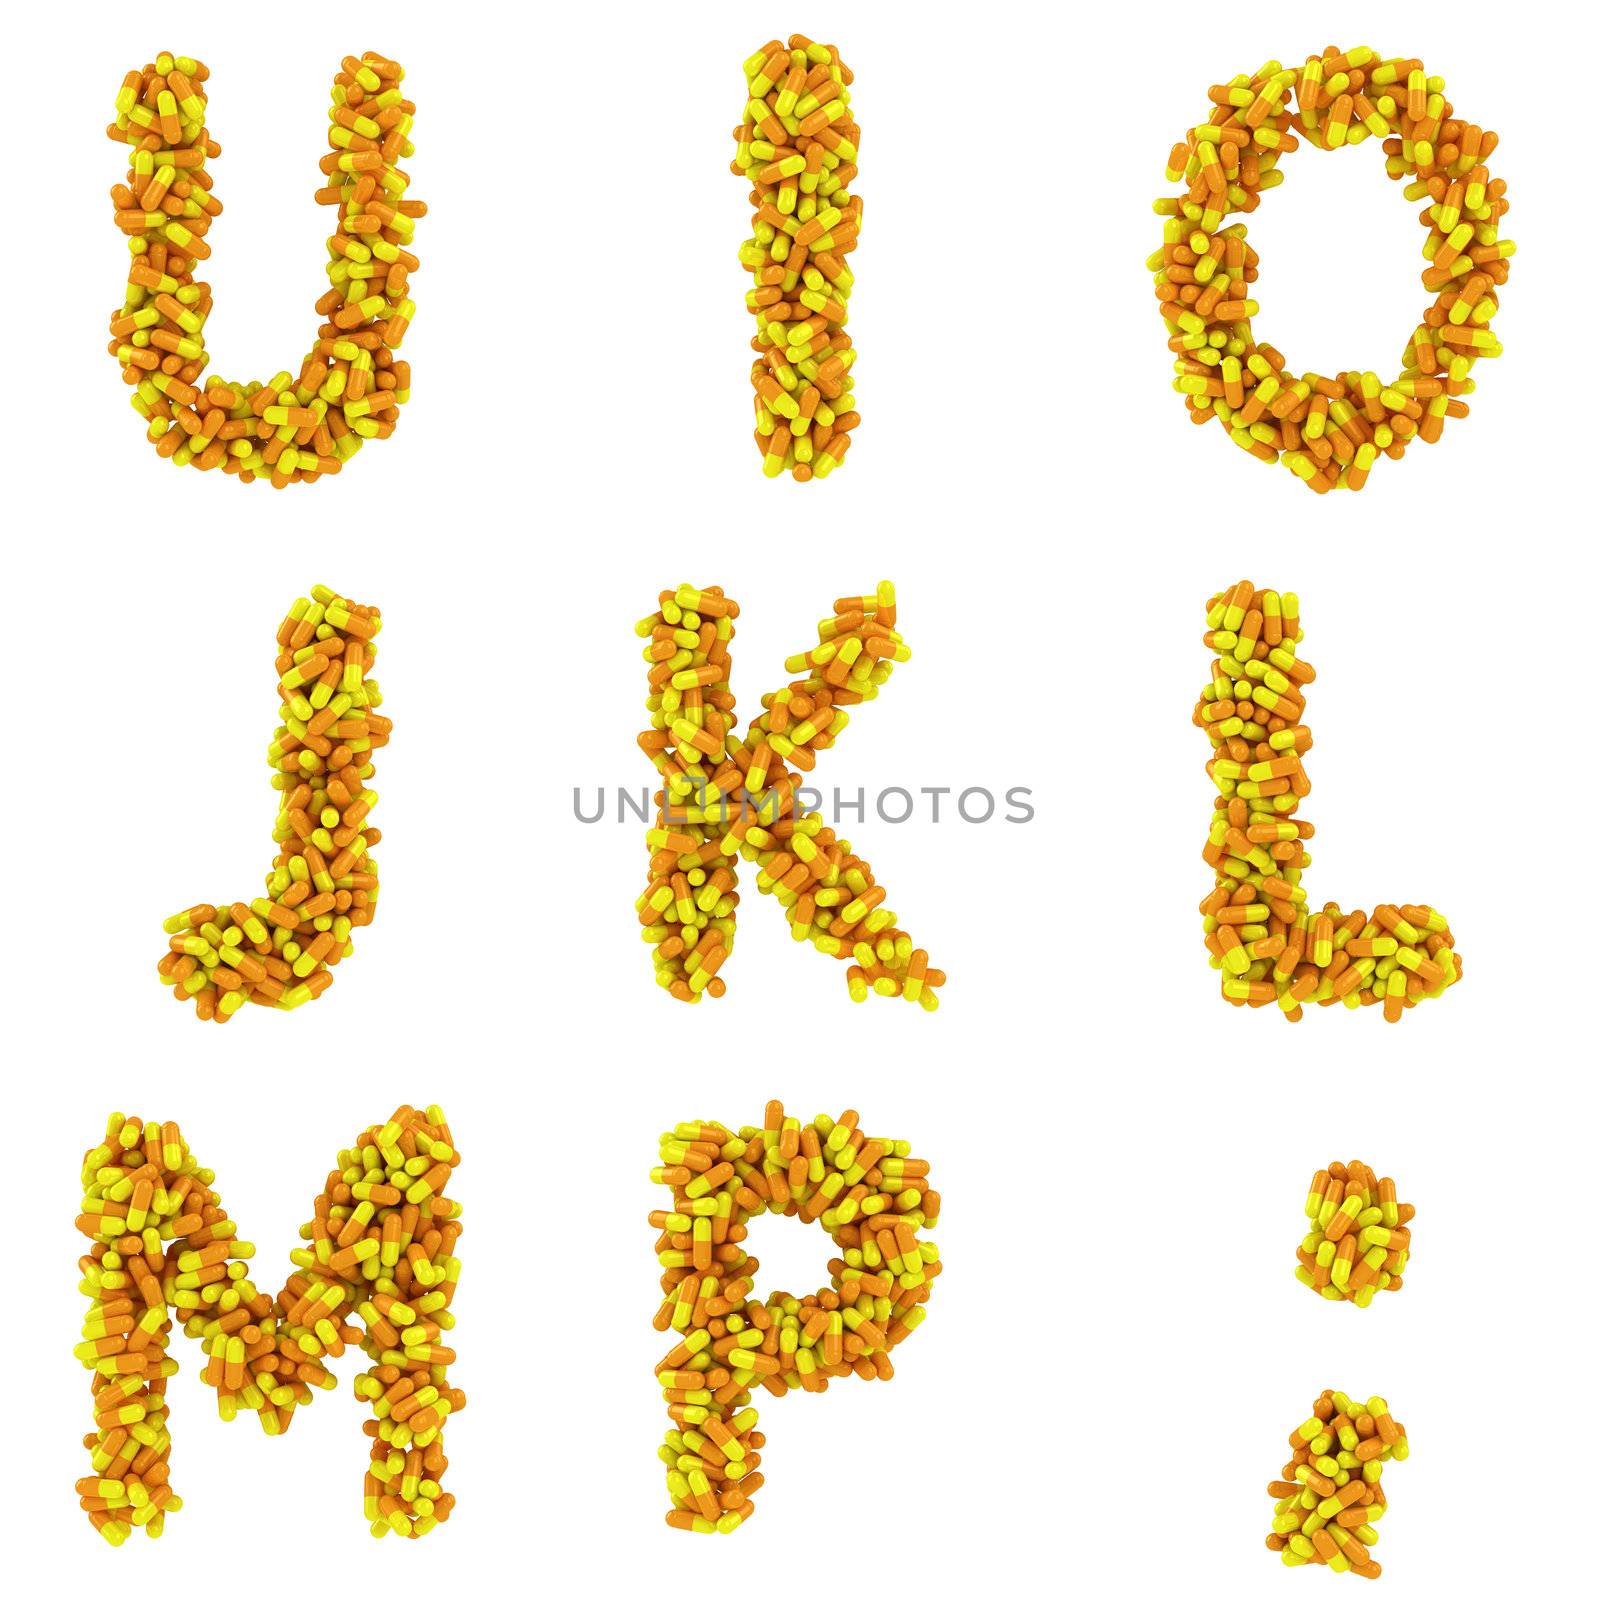 Capital letters of alphabet made from medical capsules